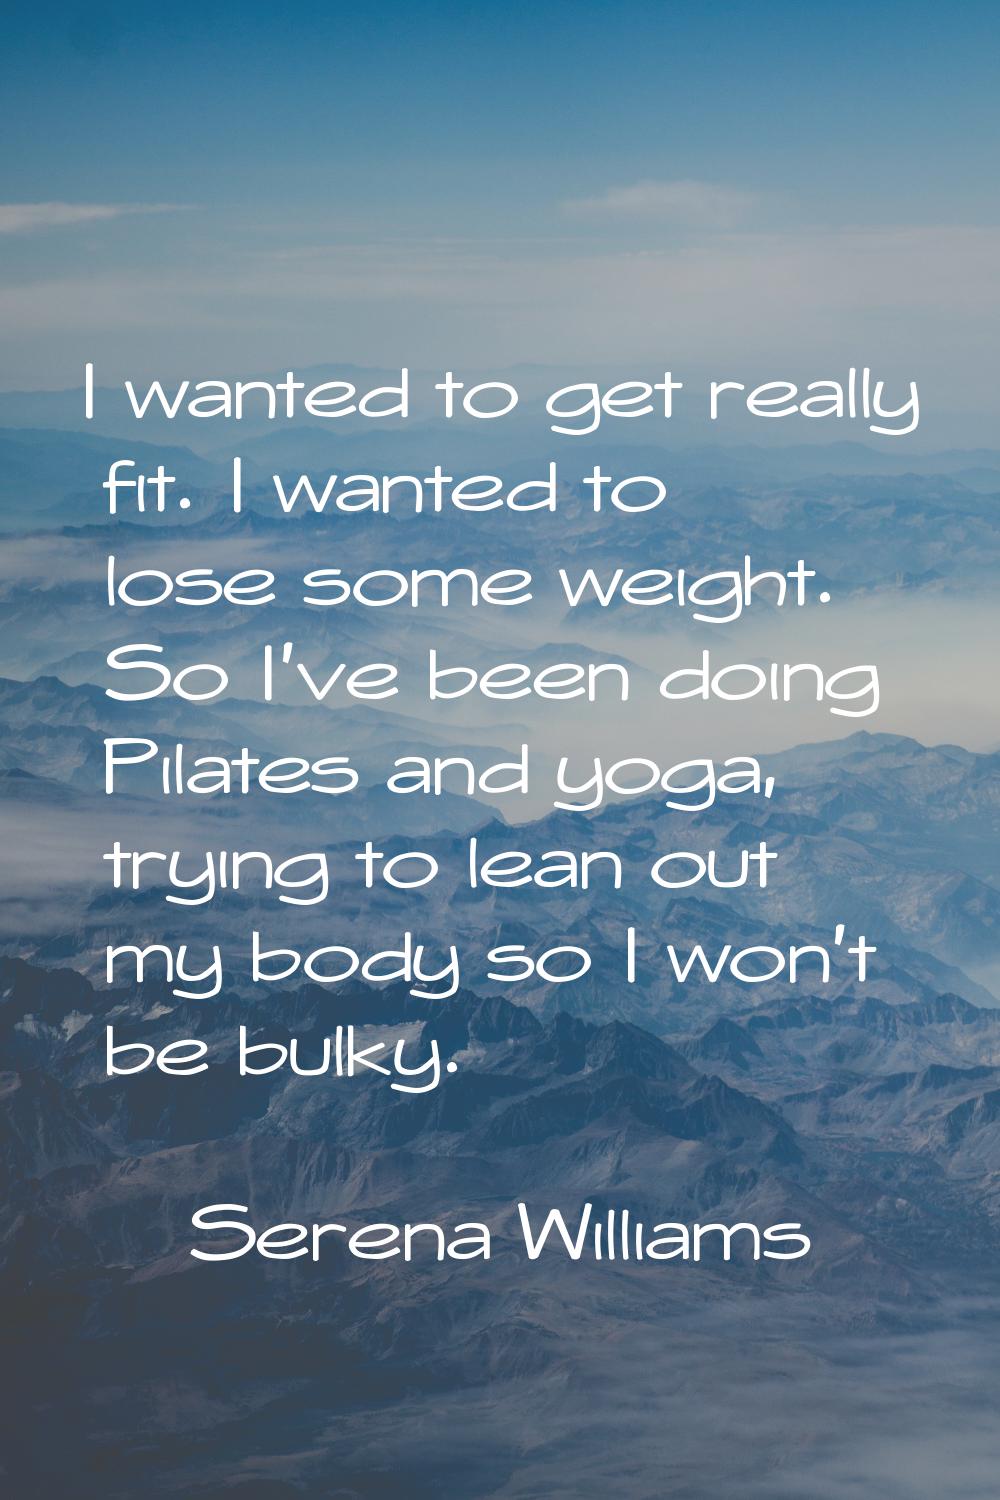 I wanted to get really fit. I wanted to lose some weight. So I've been doing Pilates and yoga, tryi